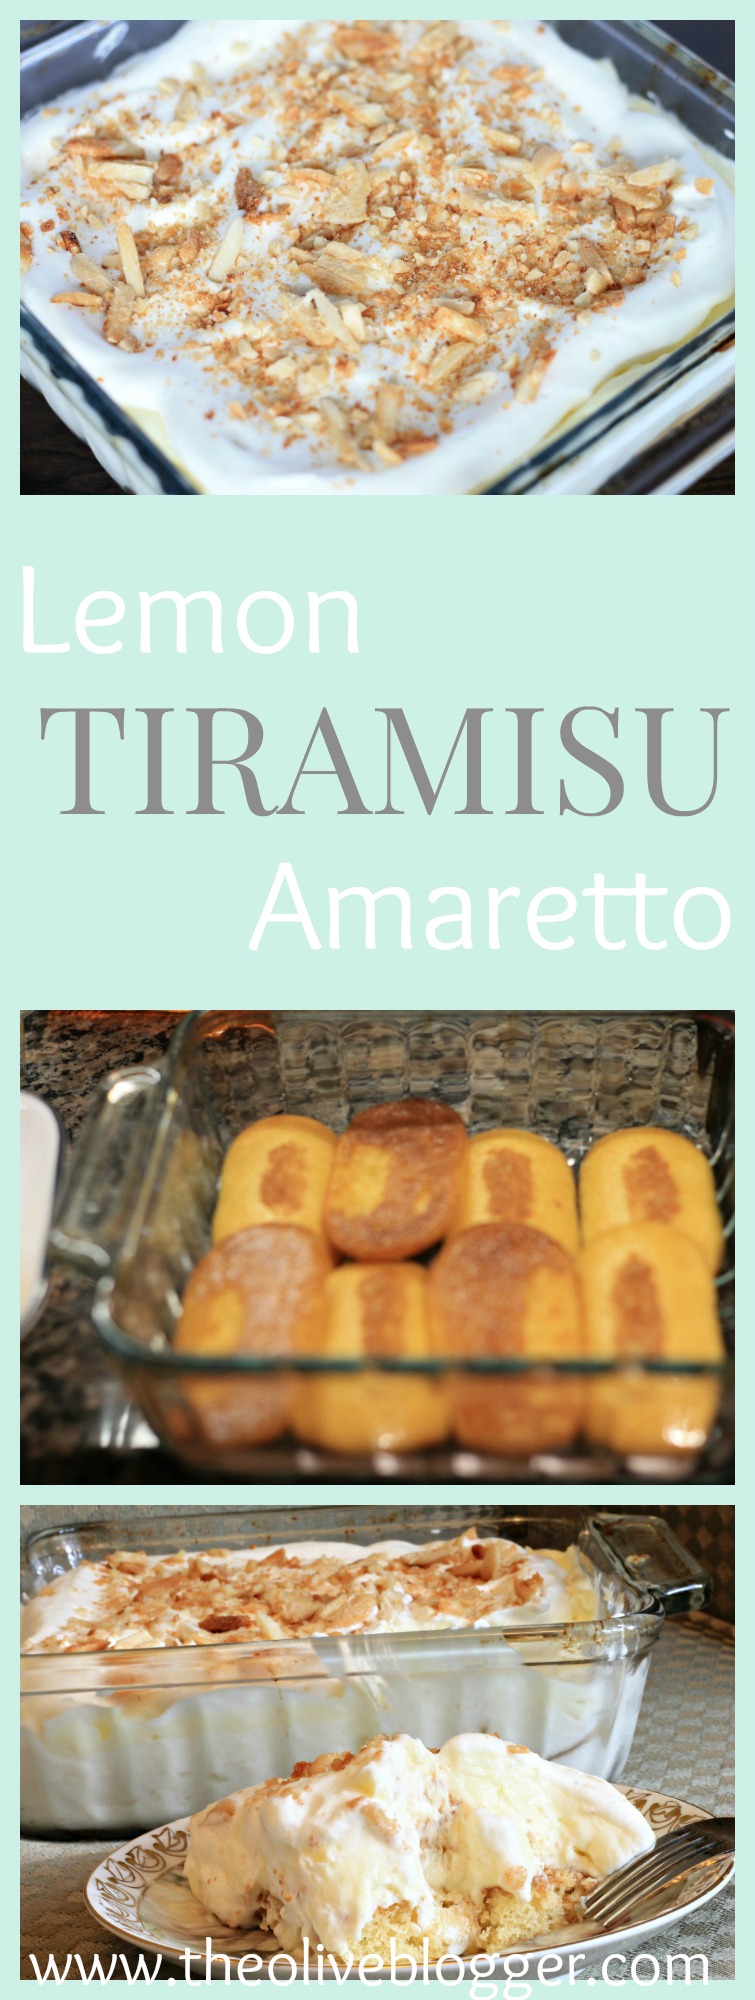 This Lemon Amaretto Tiramisu is super light and fresh tasting, and the addition of the lemon curd is seriously amazing! The cookies are dipped in a simple syrup created with Amaretto perfectly pairing with the sweetness of the mascarpone layer.